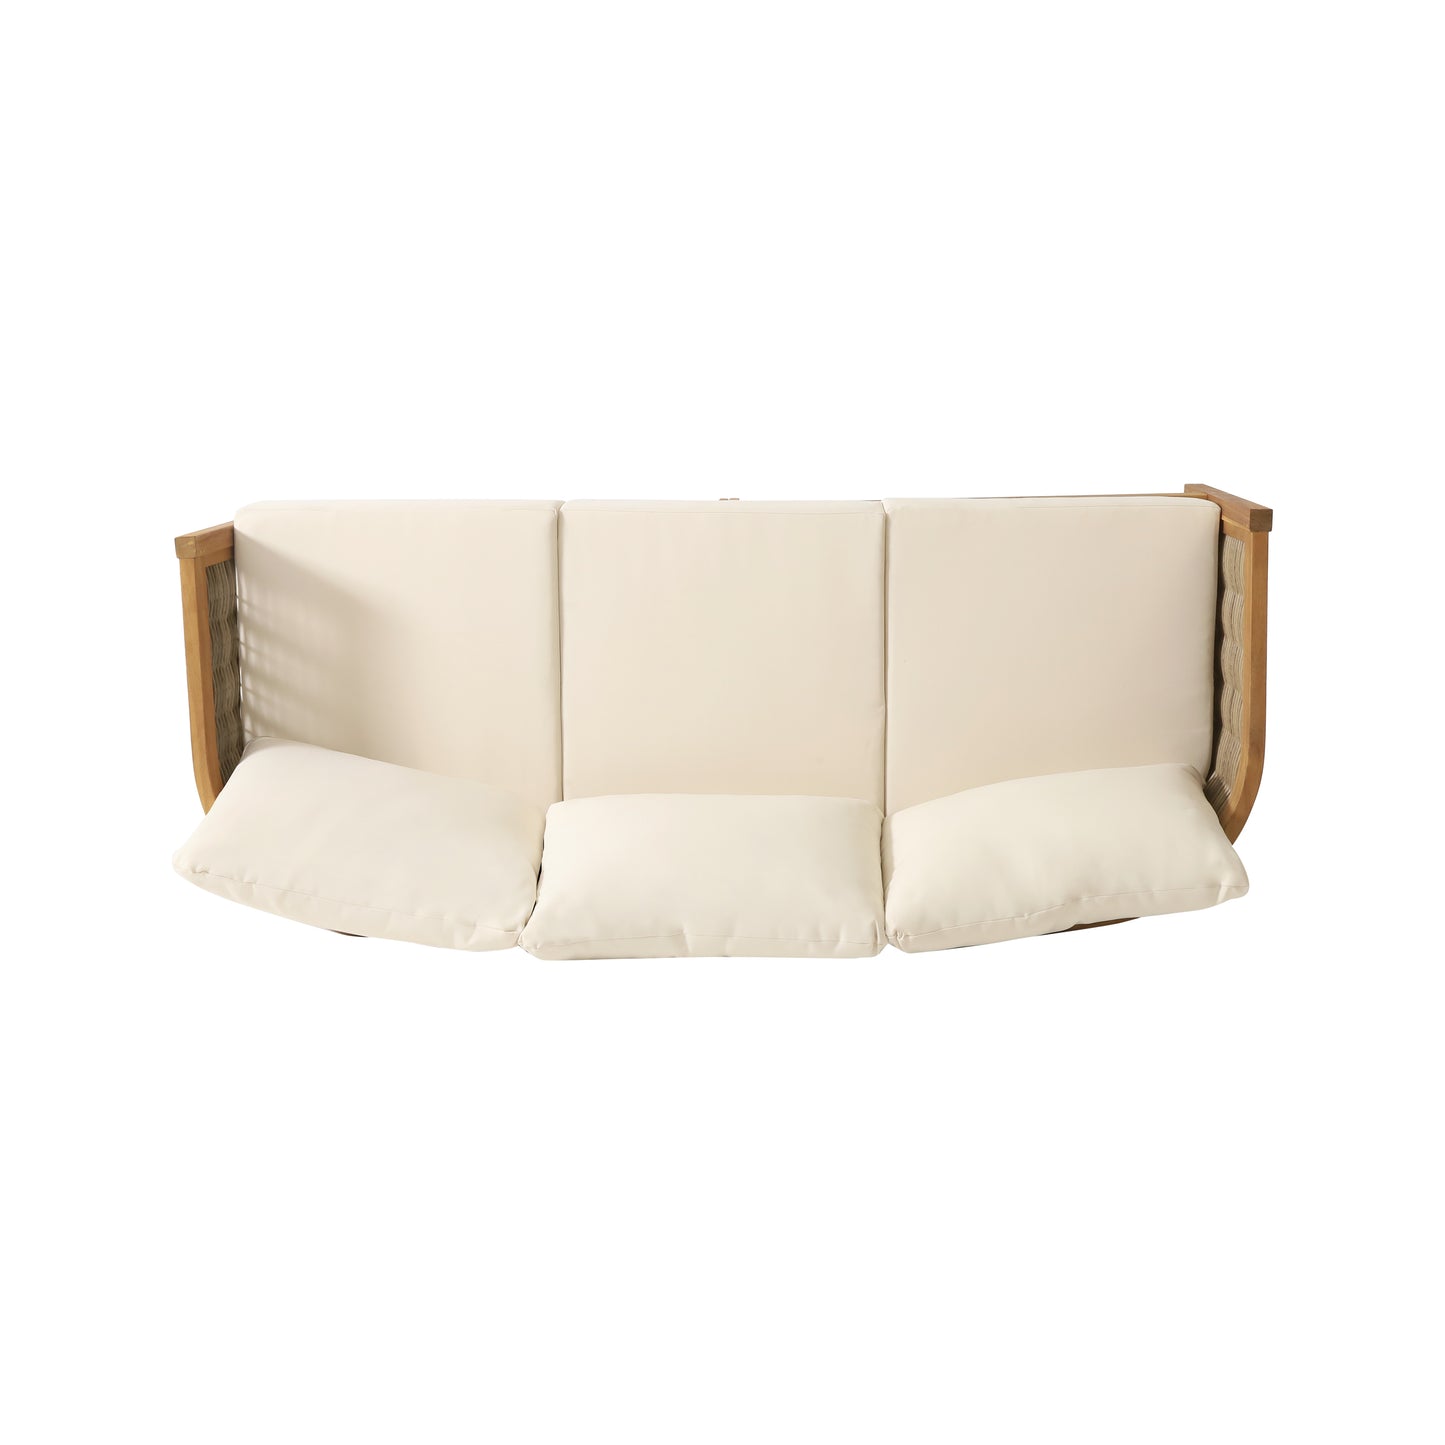 The Crowne Collection Outdoor Acacia Wood and Round Wicker 3 Seater Sofa with Cushions, Teak, Mixed Brown, and Beige